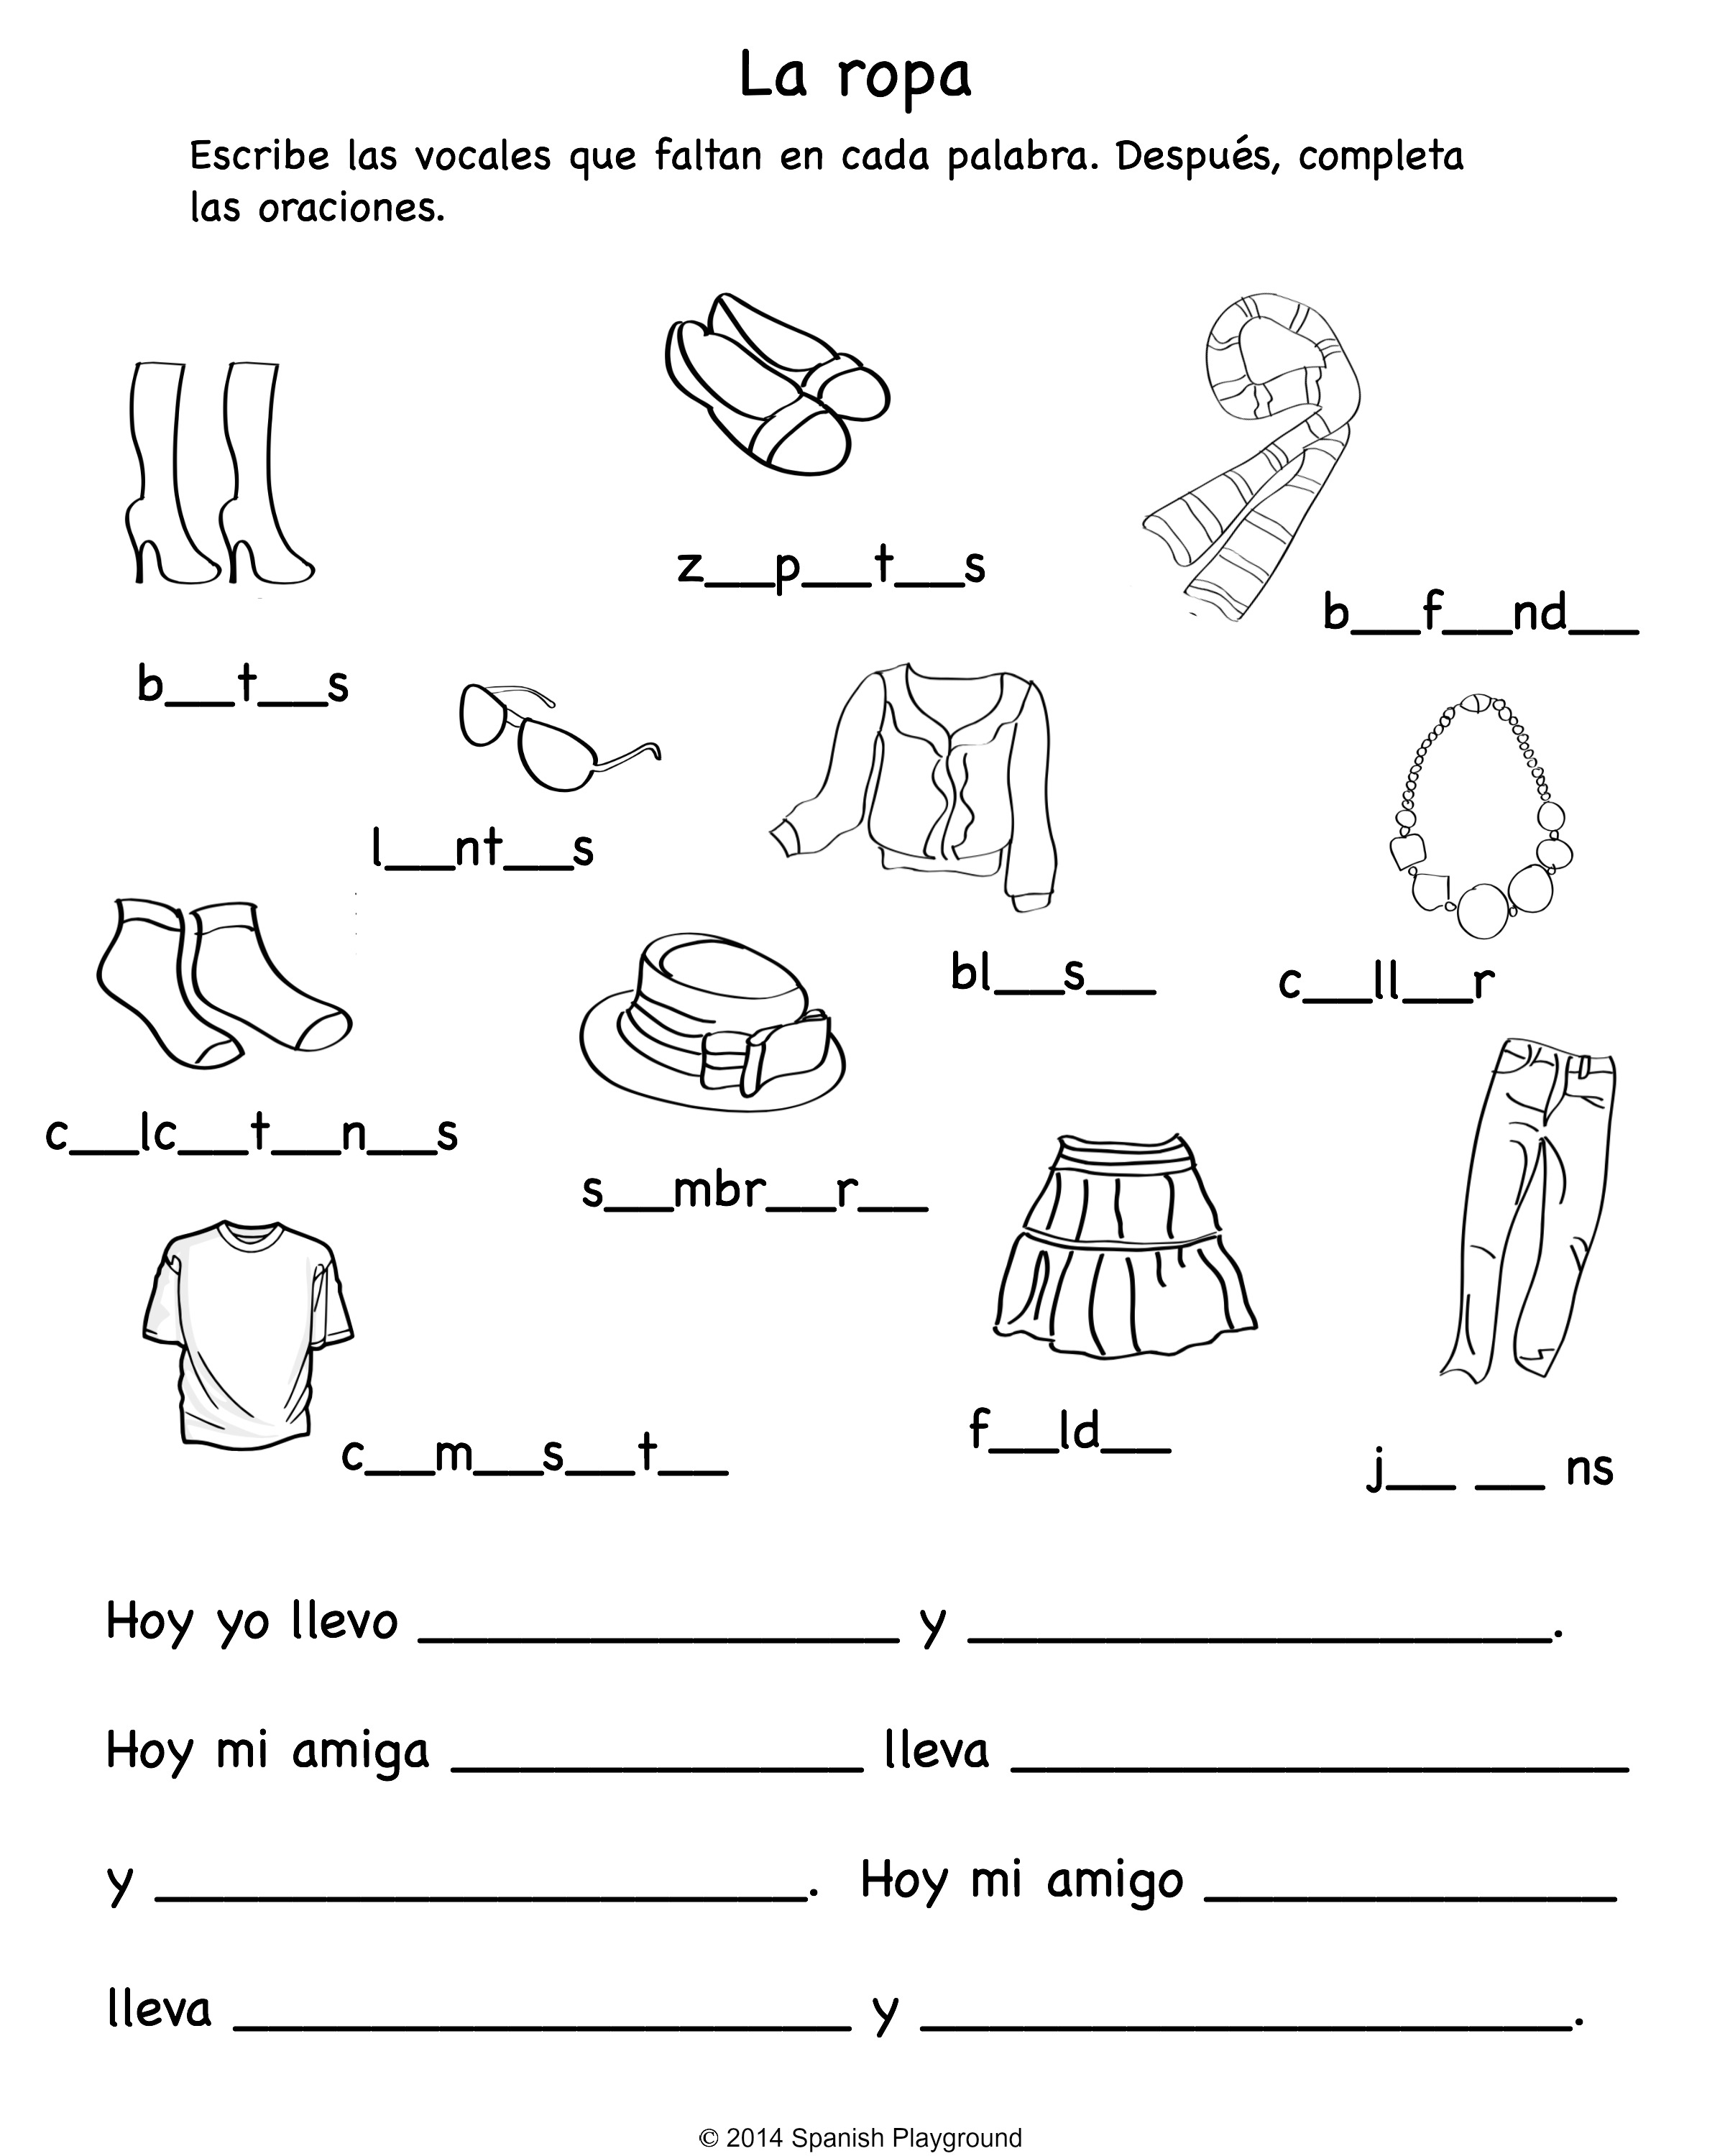 11-best-images-of-clothing-care-worksheets-hard-word-search-worksheets-spanish-clothing